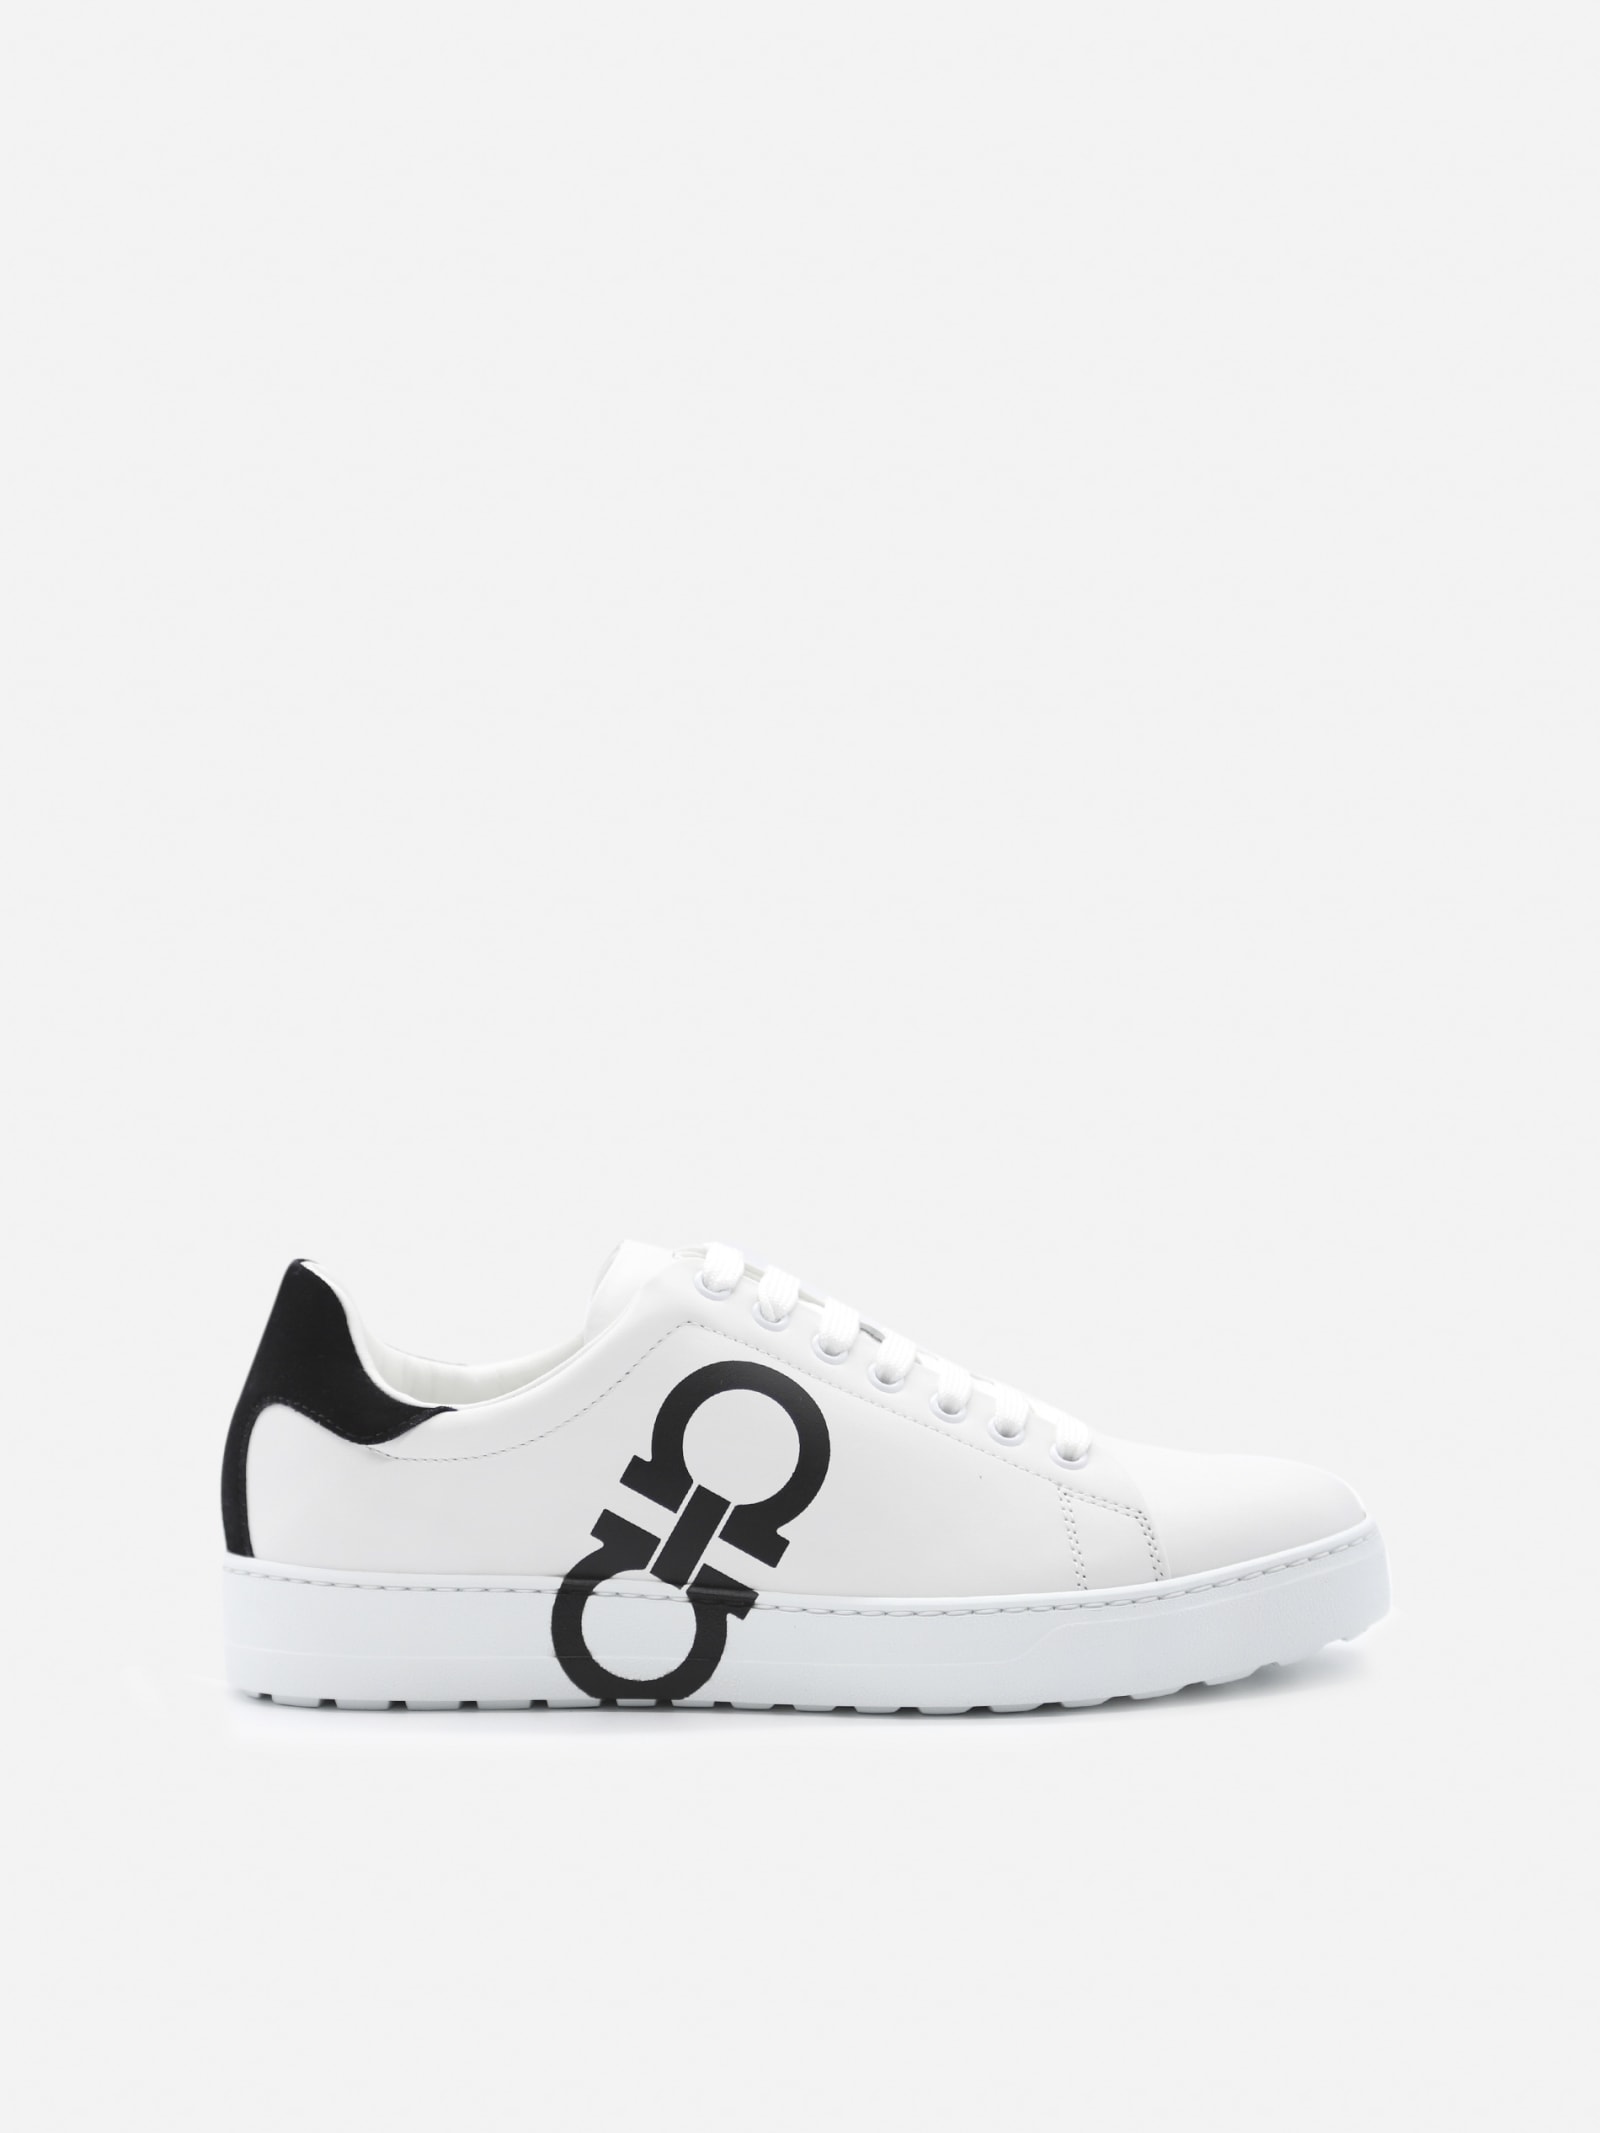 Ferragamo Gancini Sneakers In Leather With Contrasting Print